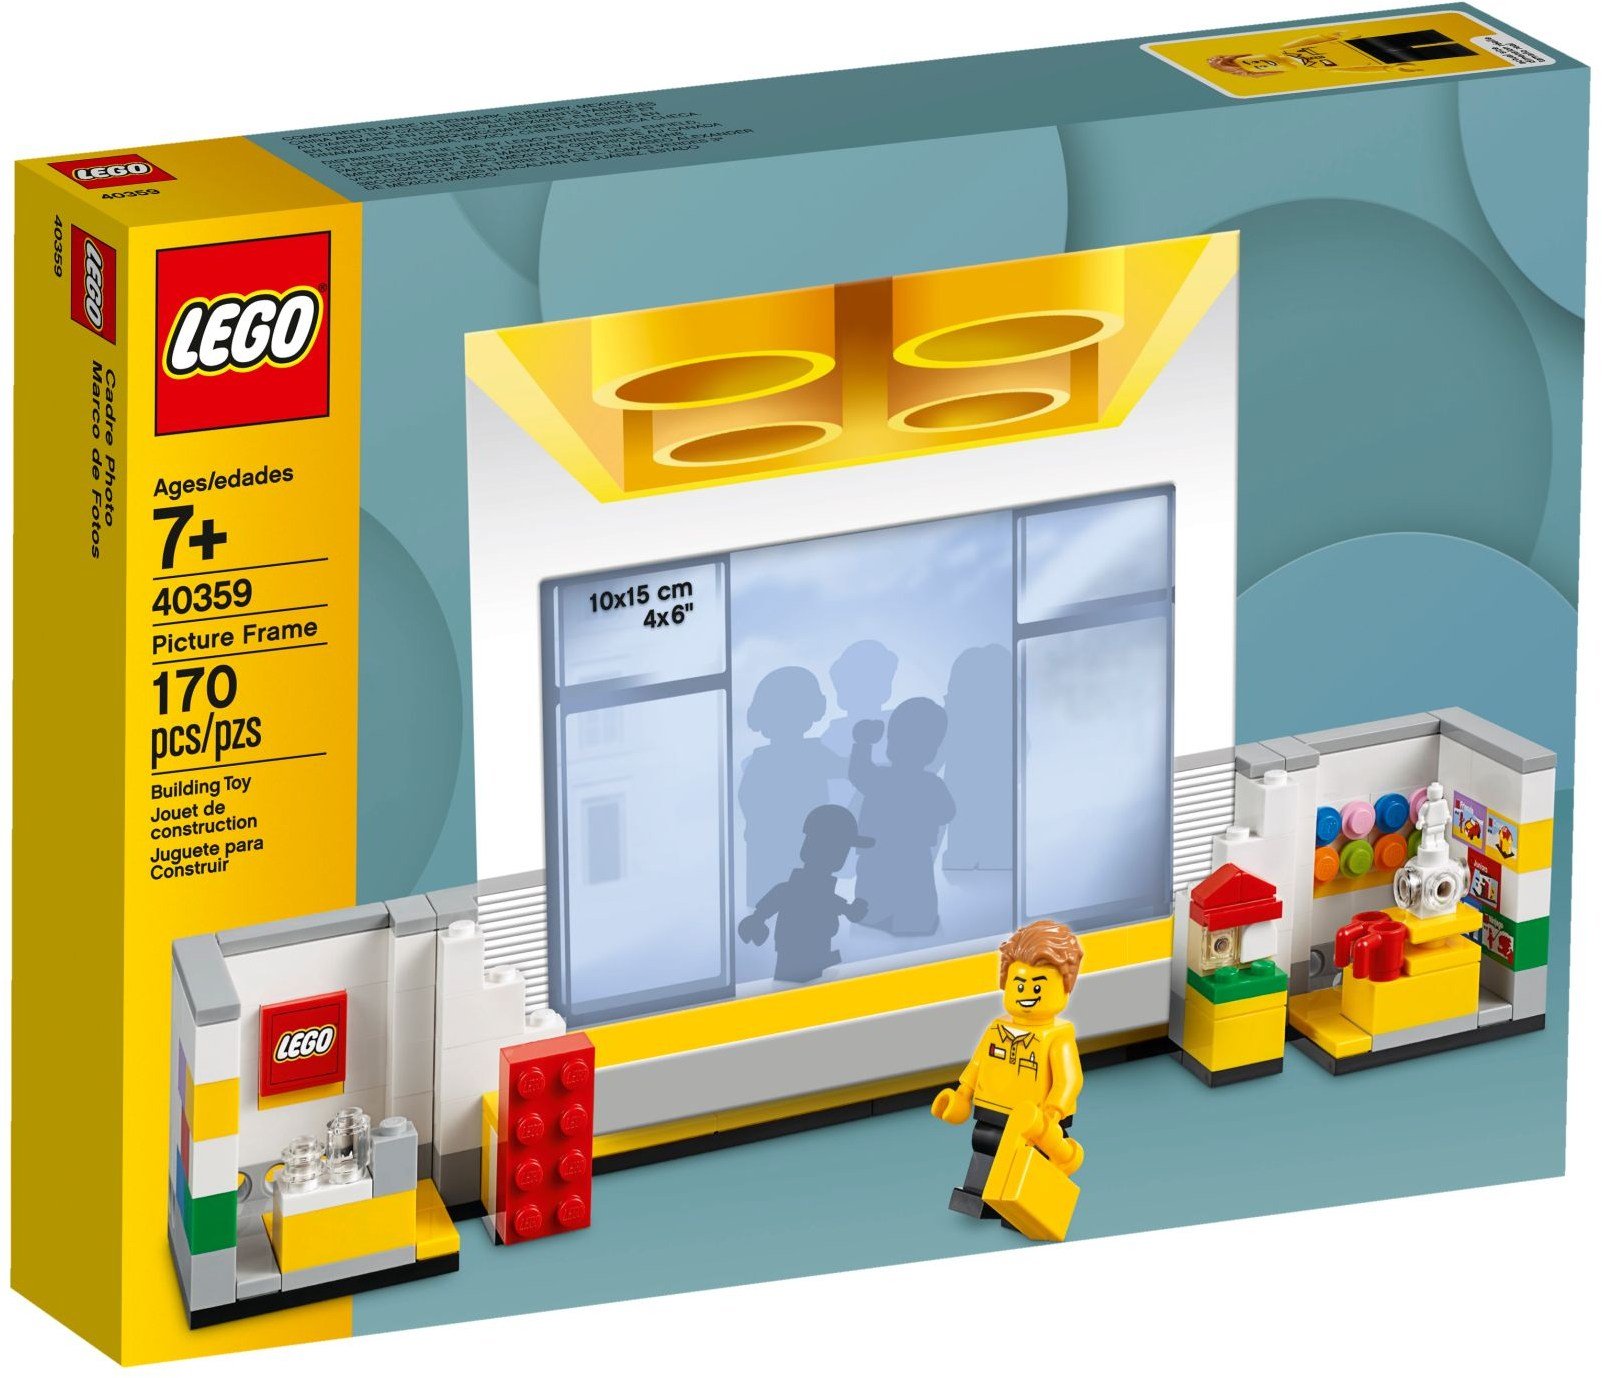 Oxide Sæt ud variabel LEGO LEGO Stores: The Ultimate Ultimate Guide - BrickNerd - All things LEGO  and the LEGO fan community